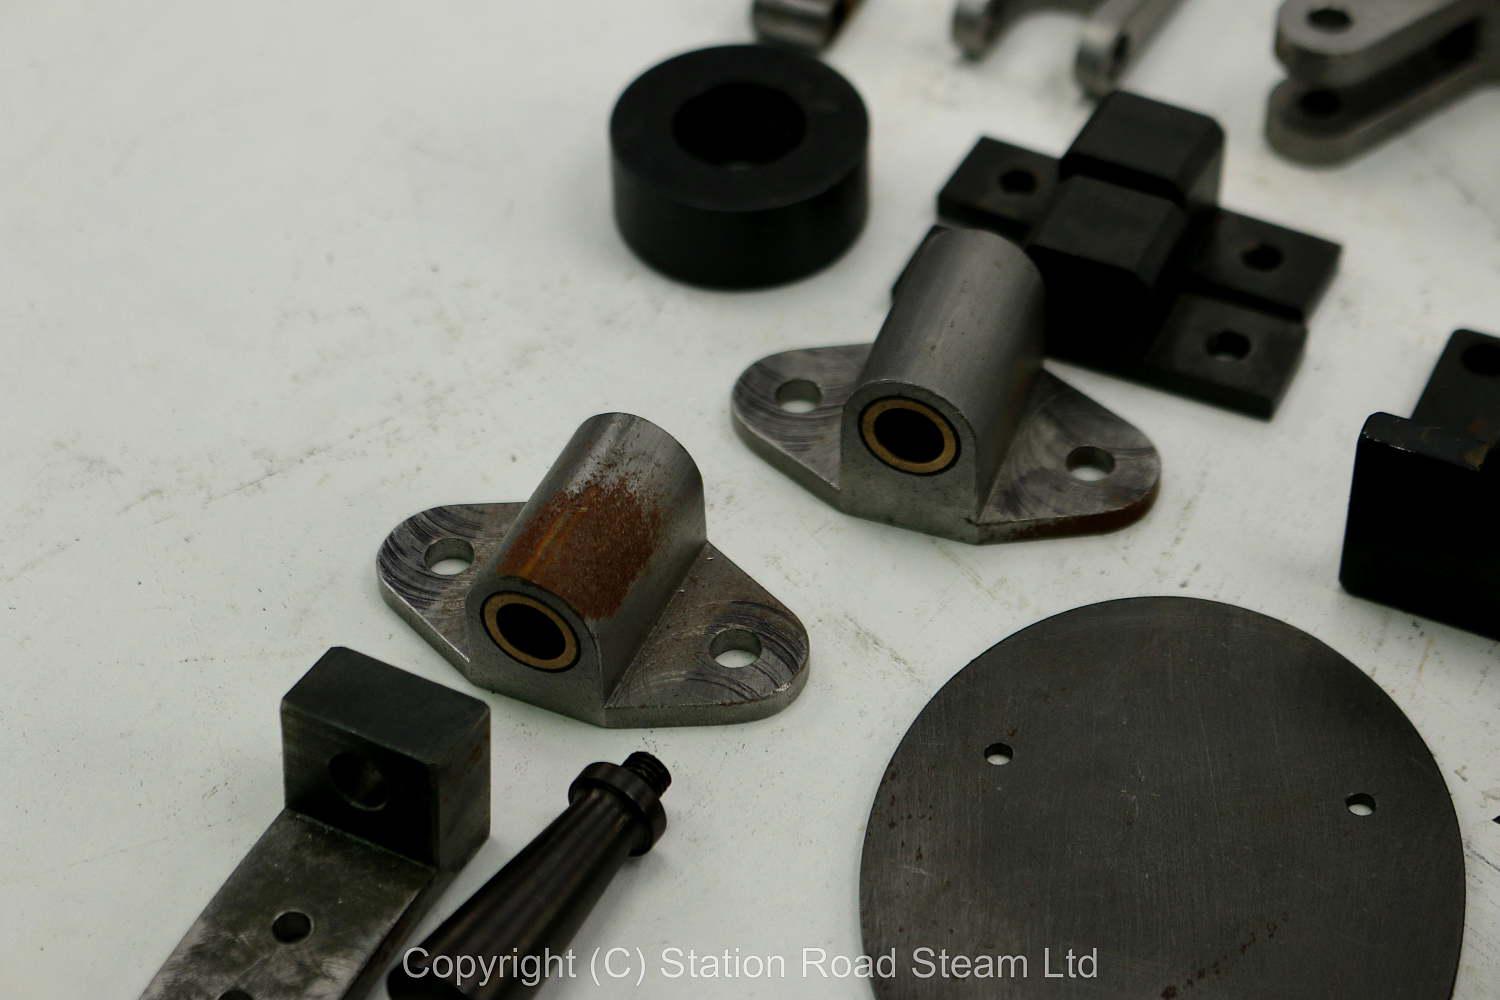 Wheels, boiler kit and professionally machined parts for 4 inch scale Foster